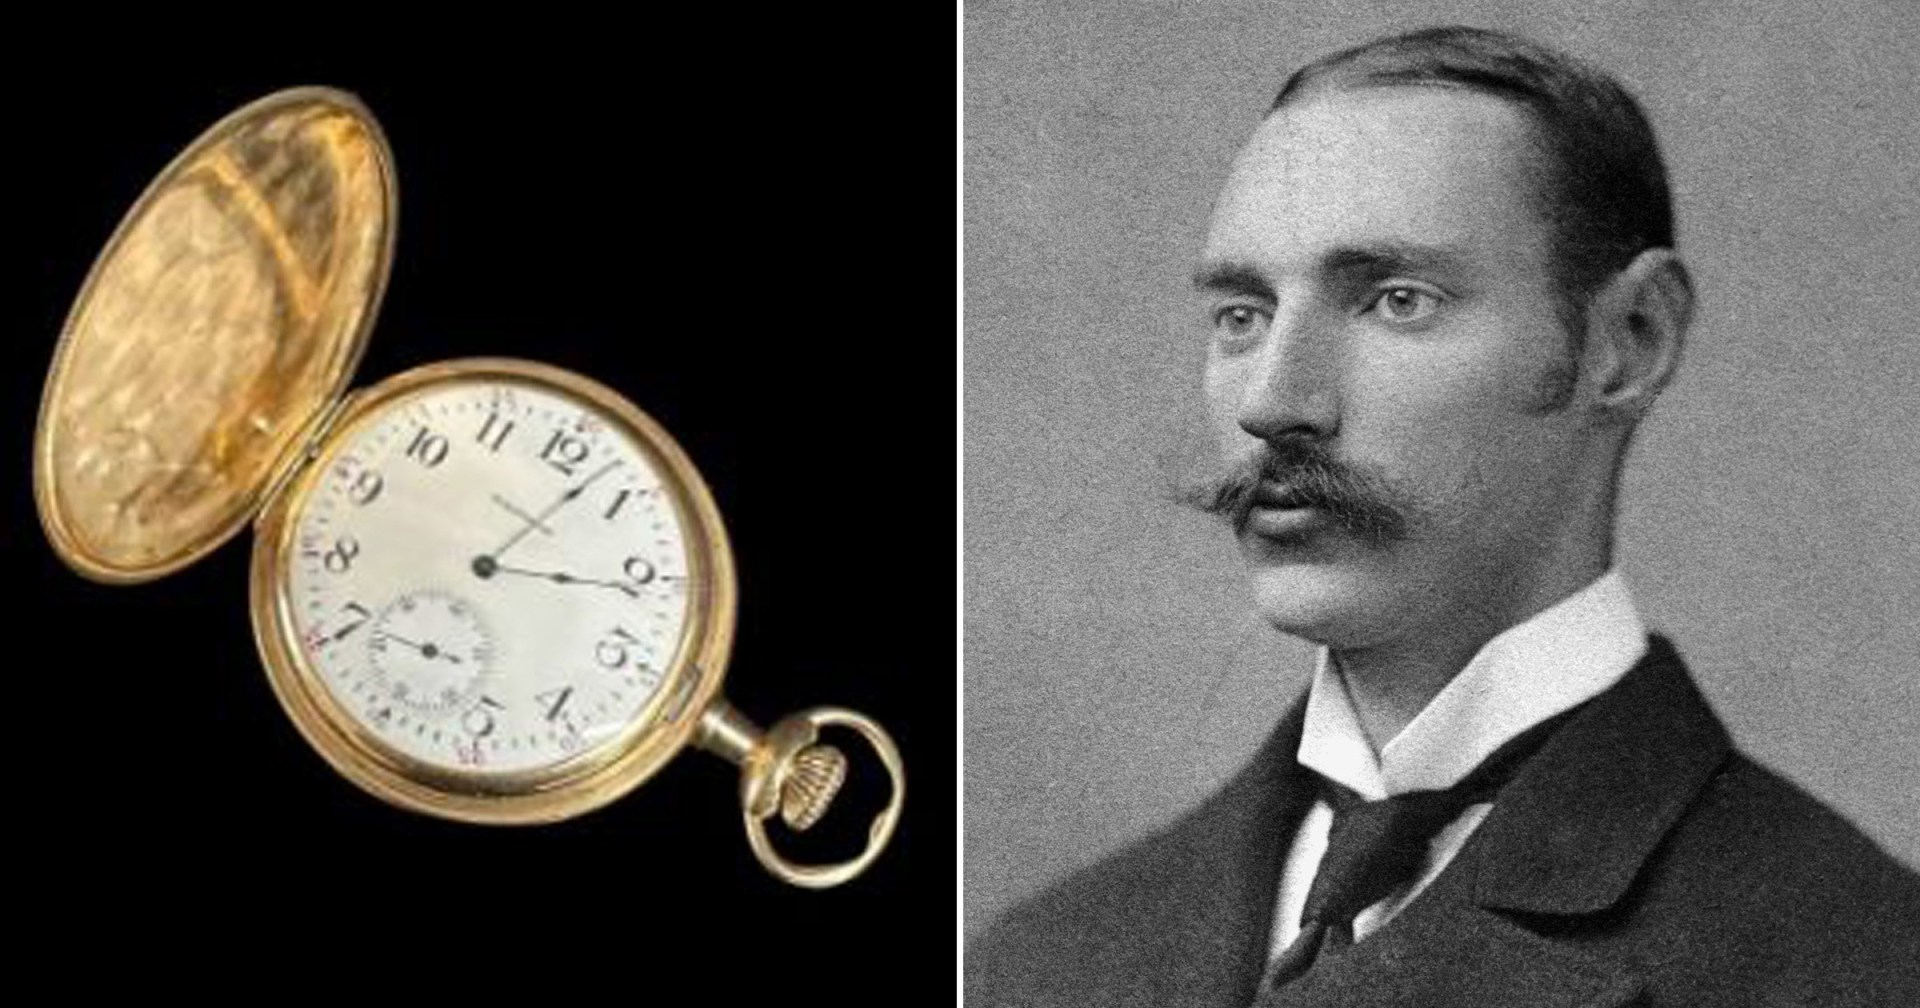 gold pocketwatch belonging to titanic's richest passenger sells for £1,175,000